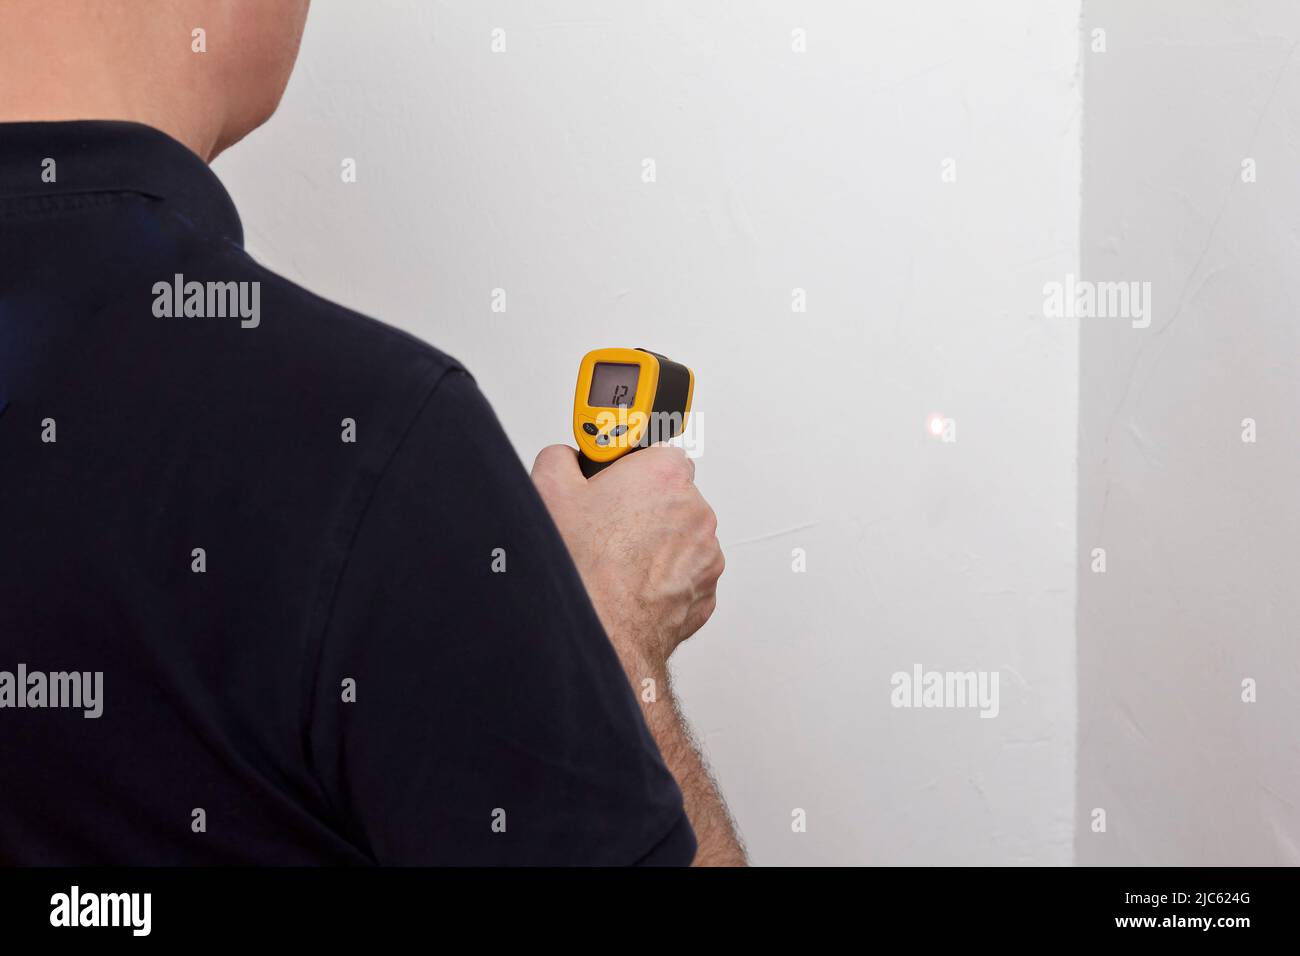 Save energy concept: man measuring the temperature of an external white wall with an infrared or laser thermometer. Stock Photo